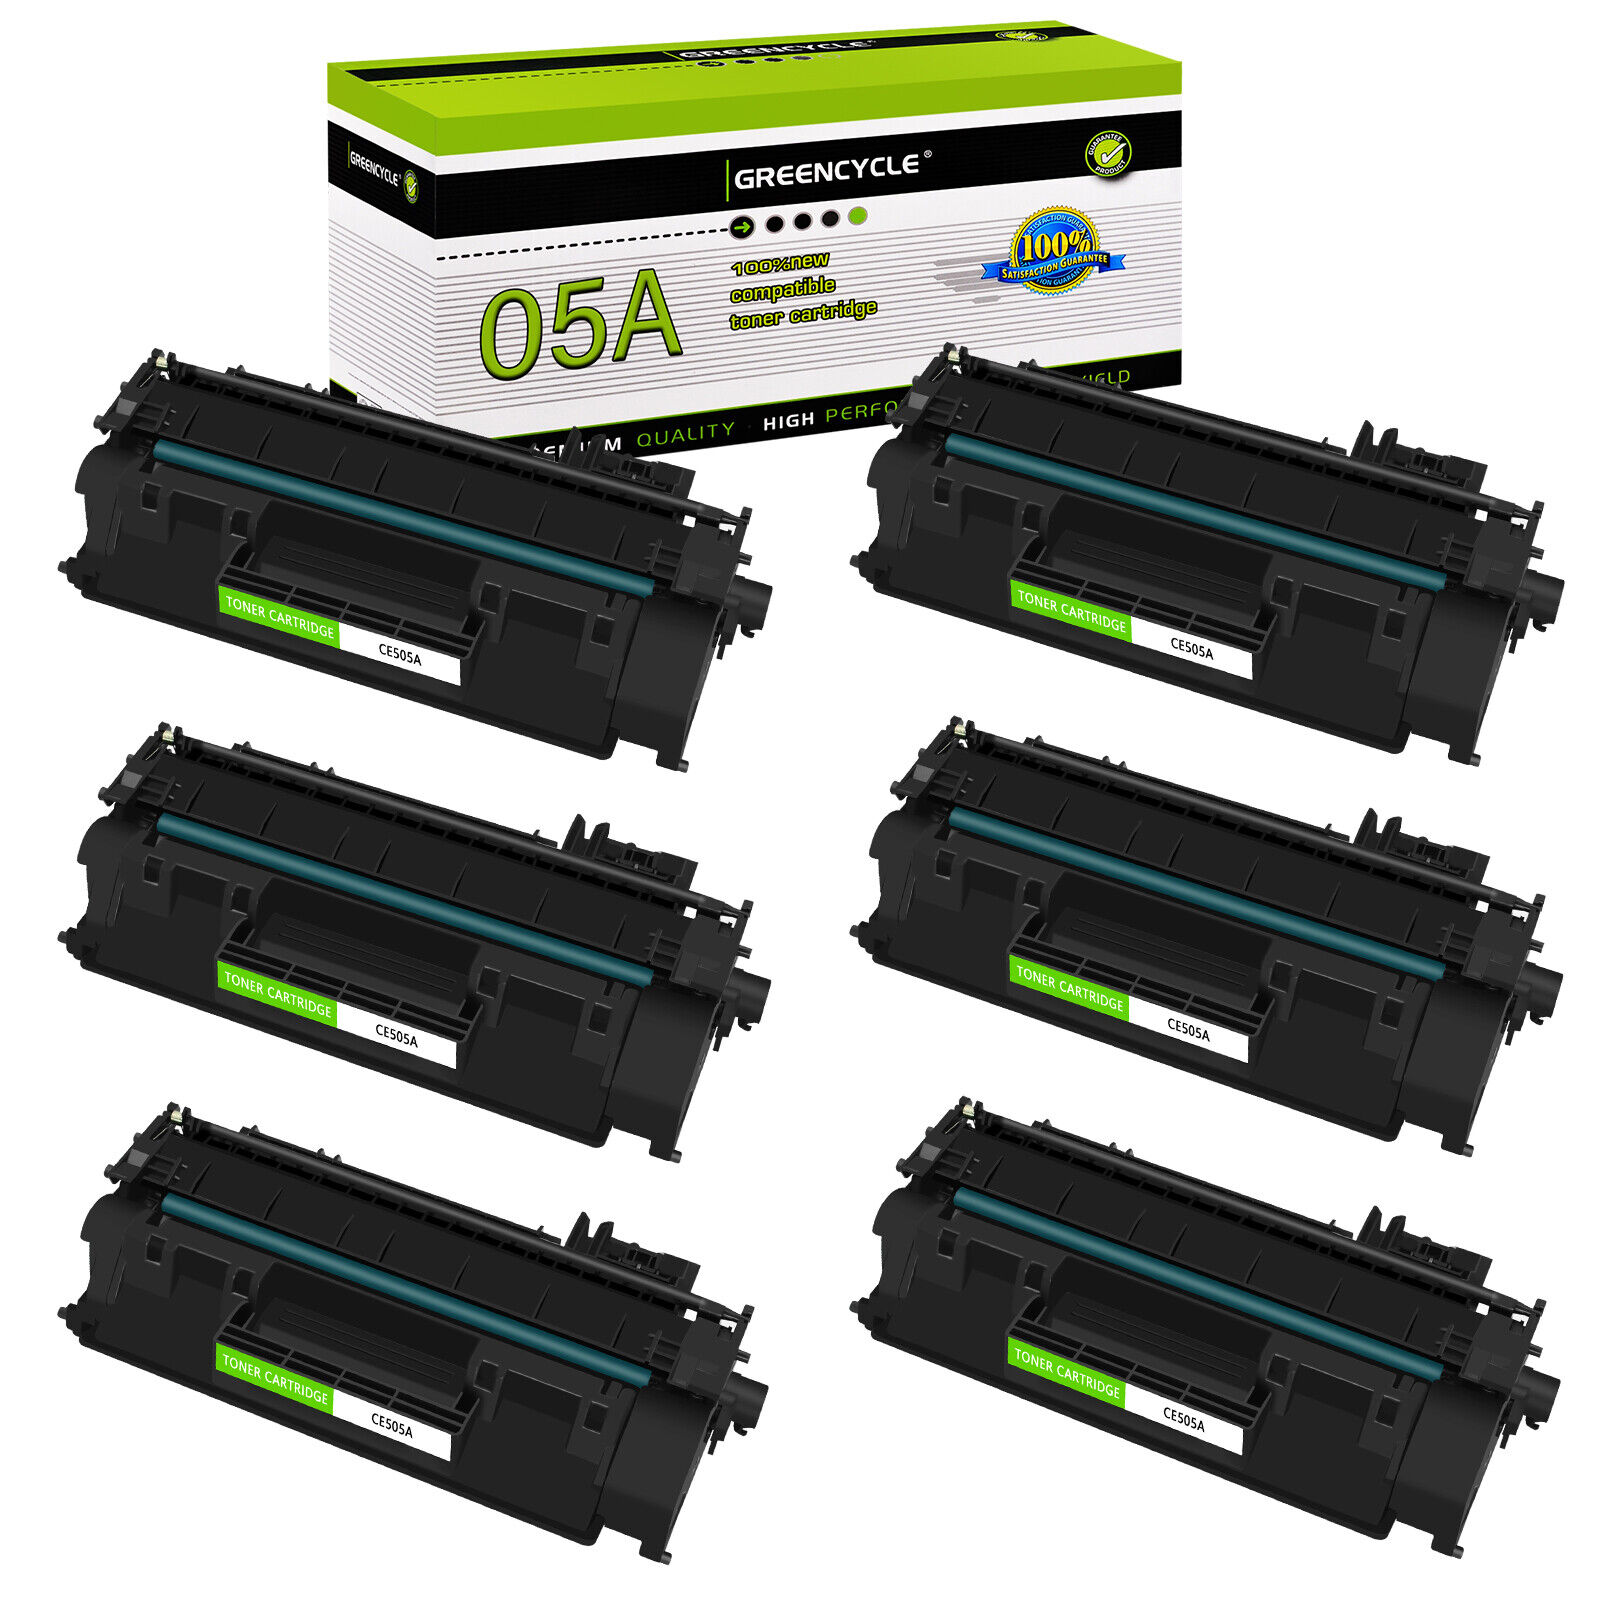 6PK CREENCYCLE CE505A 05A Toner Cartridge For HP LaserJet P2055dn P2030 P2035n